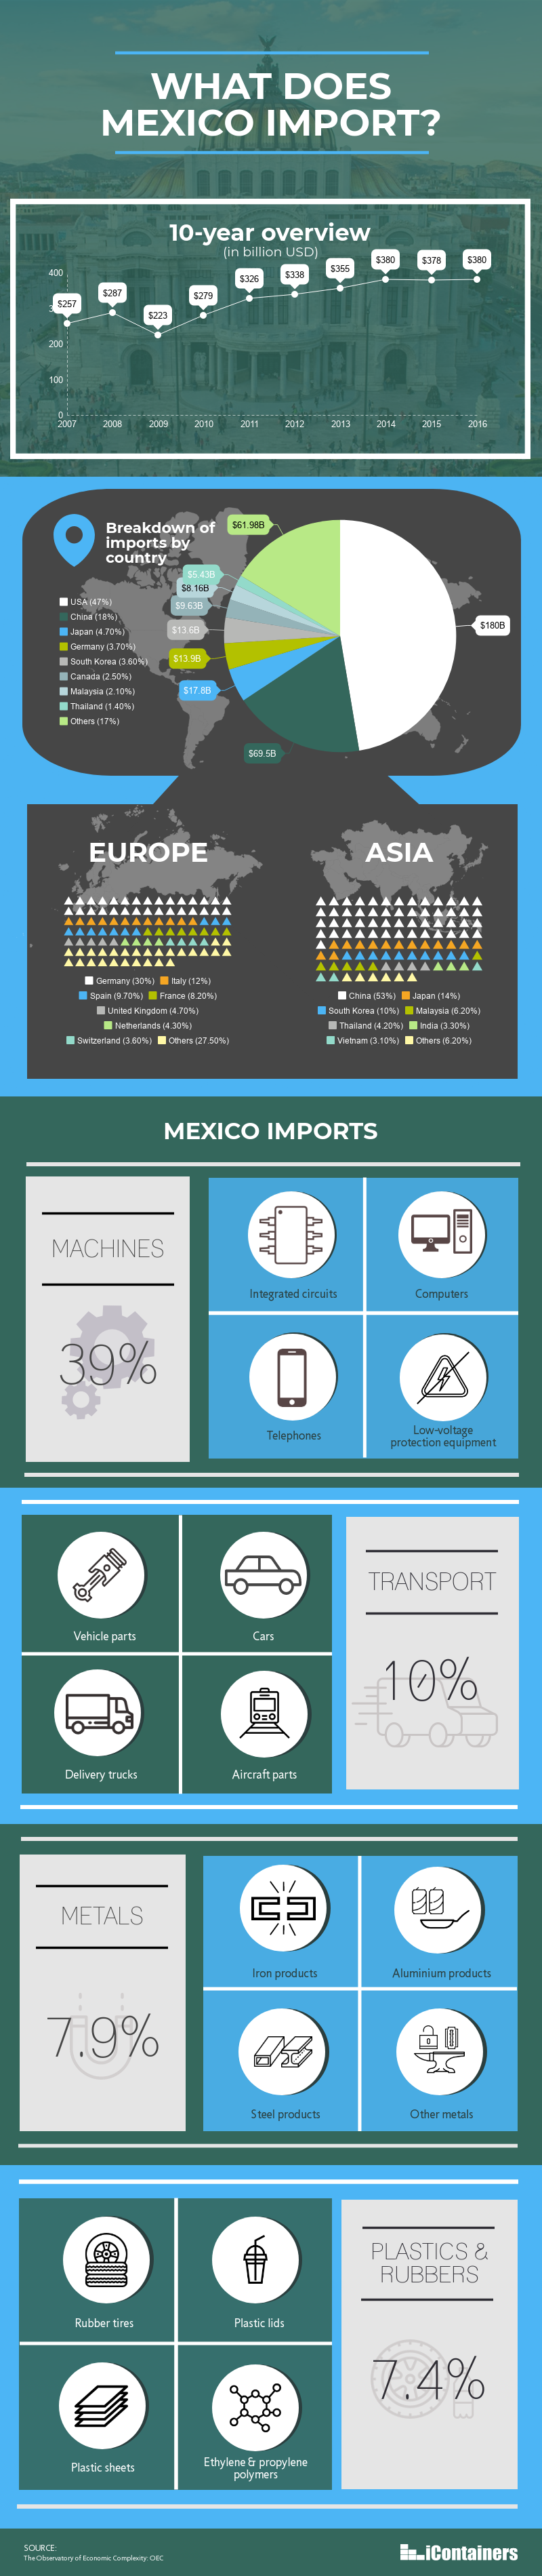 what-does-mexico-import-infographic.png